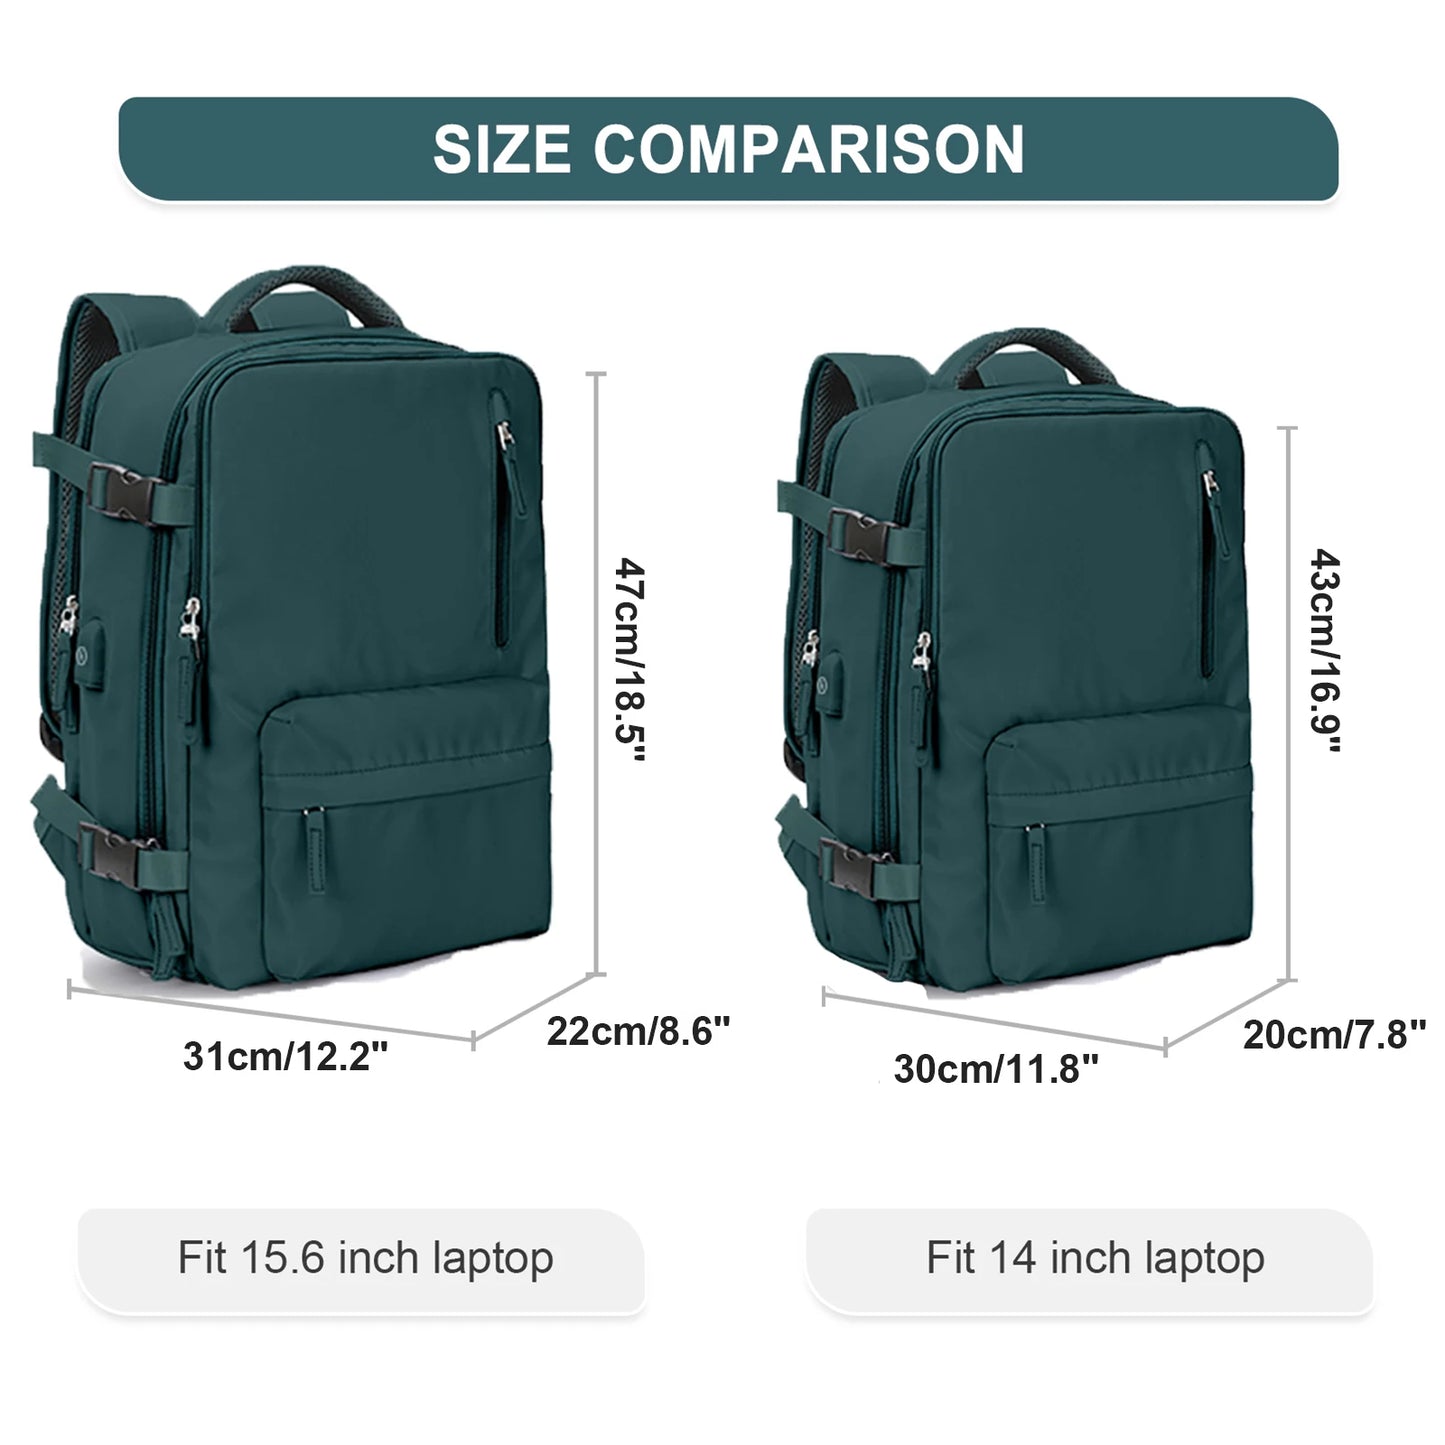 Travel Backpack Carry on Personal Item Bag for Flight Approved, 35L Hand Luggage Suitcase Waterproof Weekender Bag for Men Women